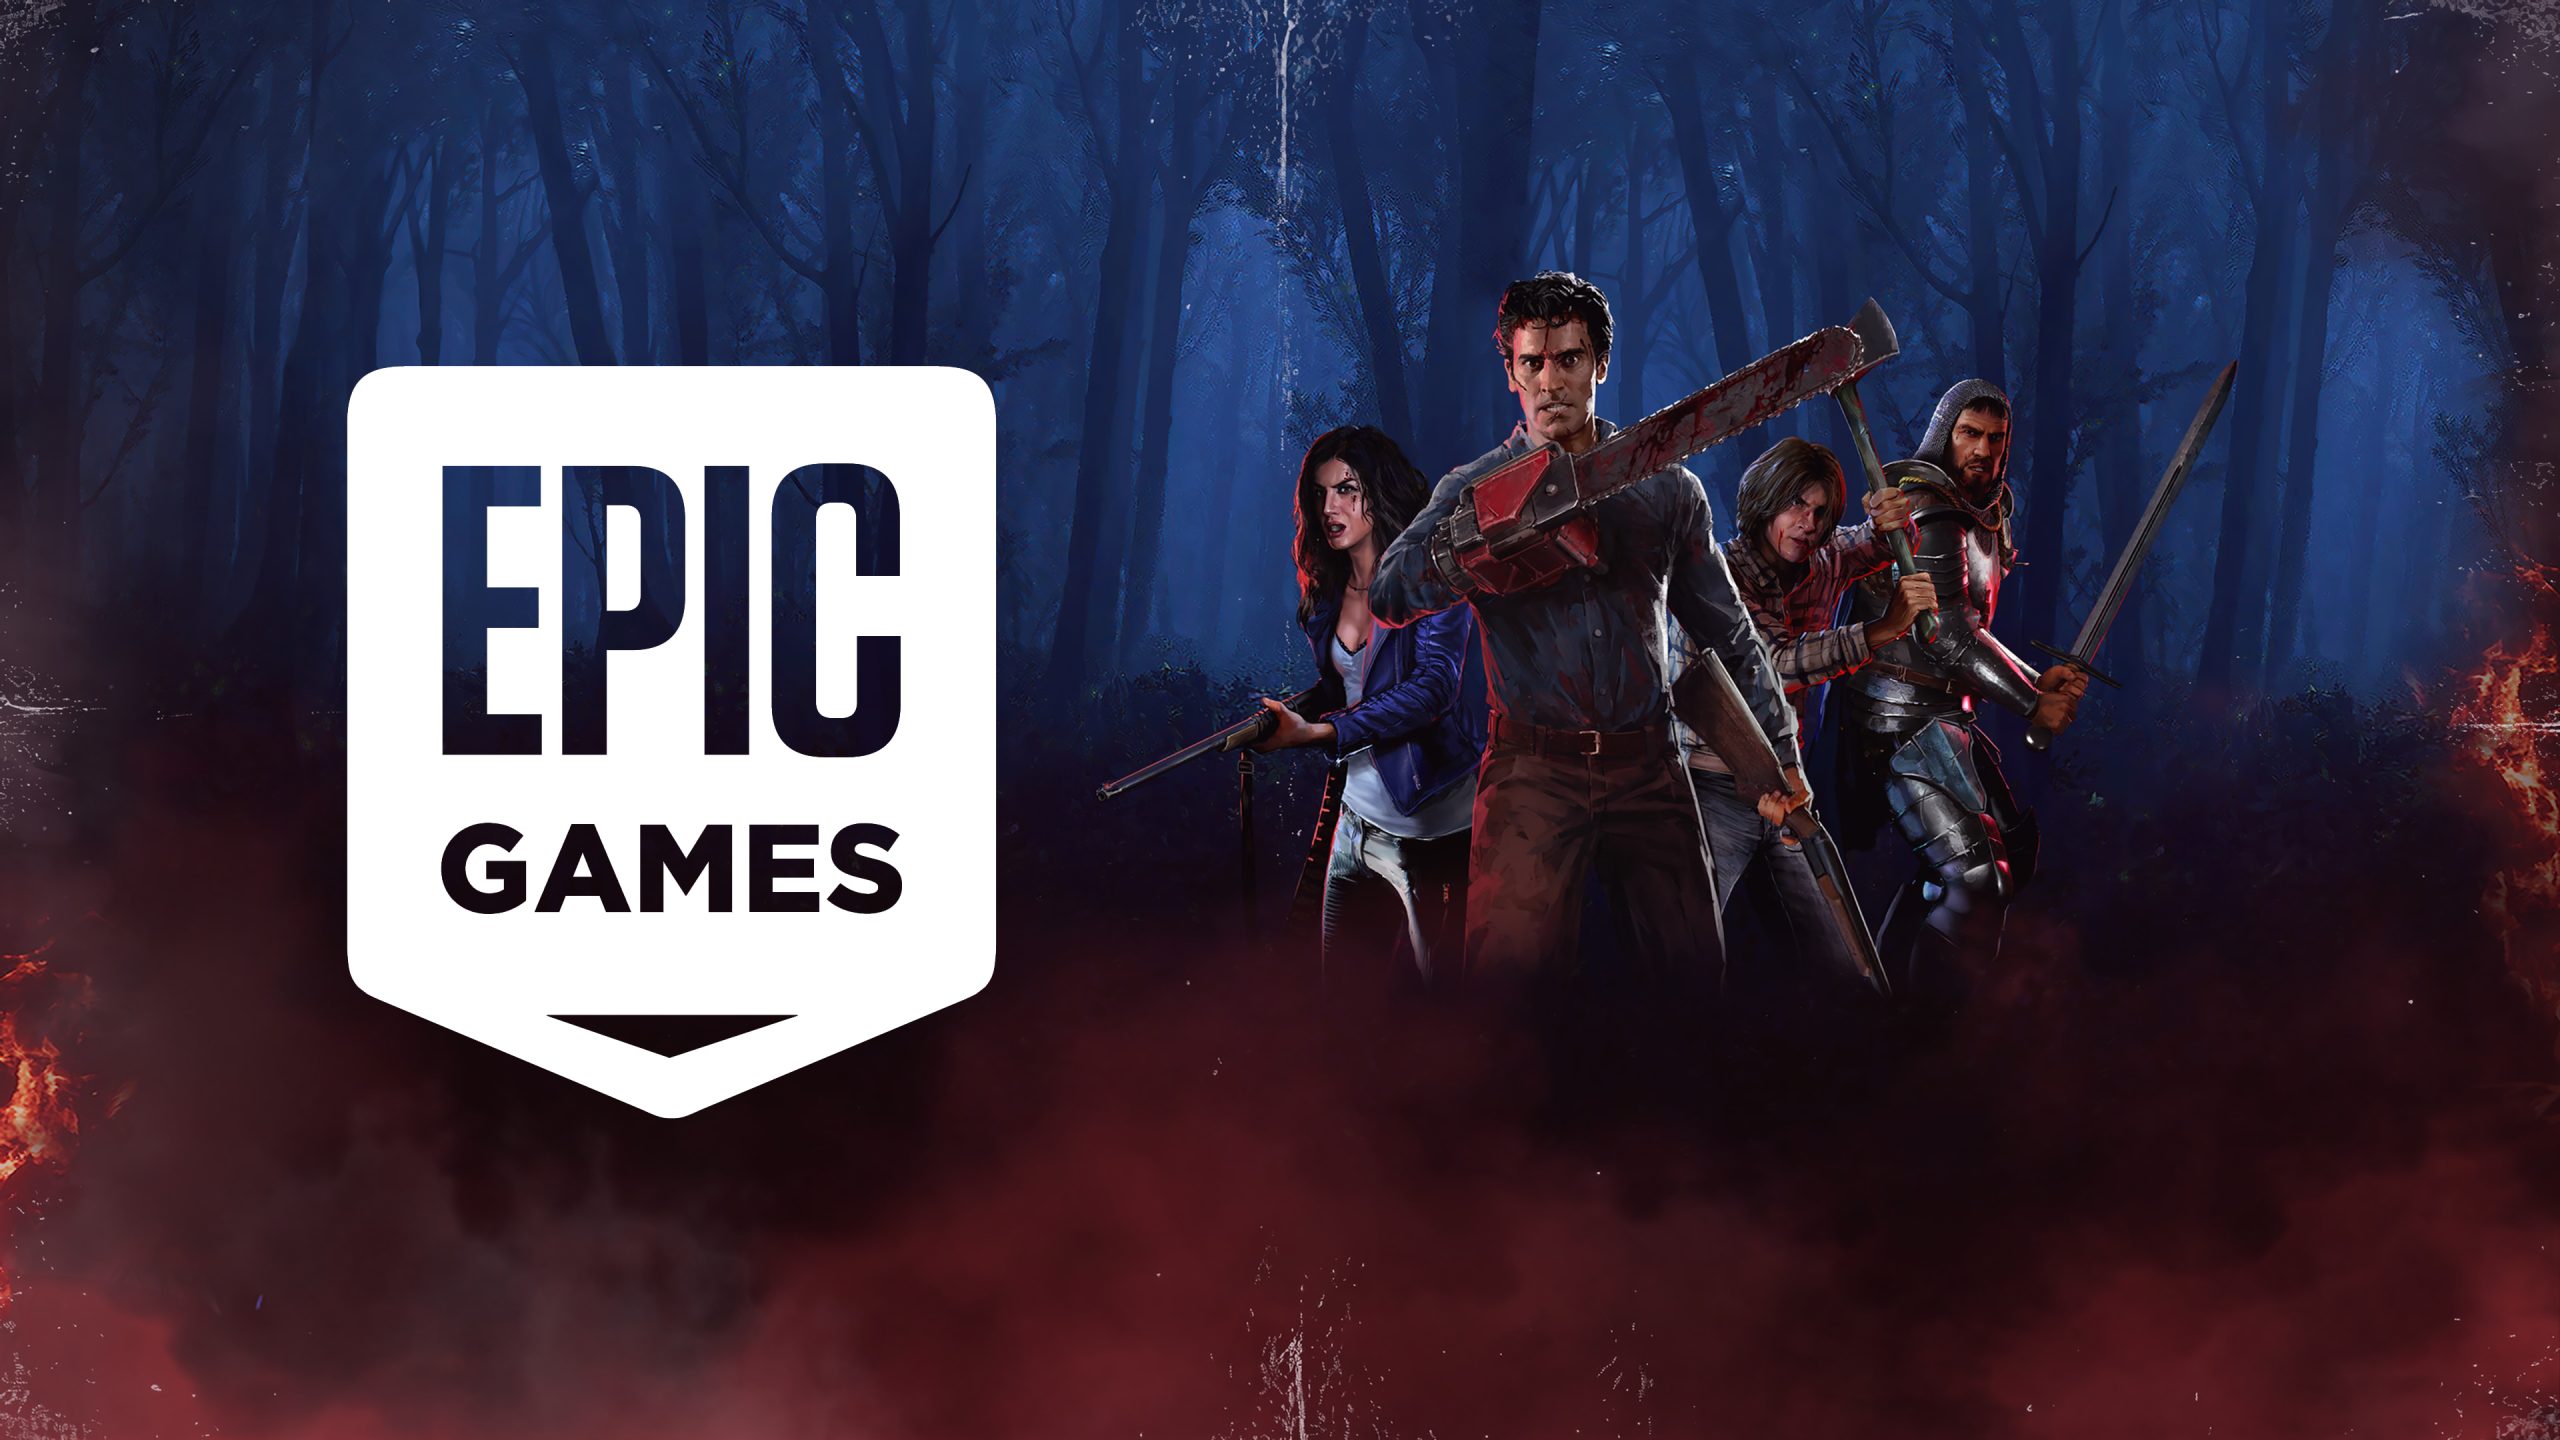 FREE Evil Dead: The Game and Dark Deity on Epic Games Store